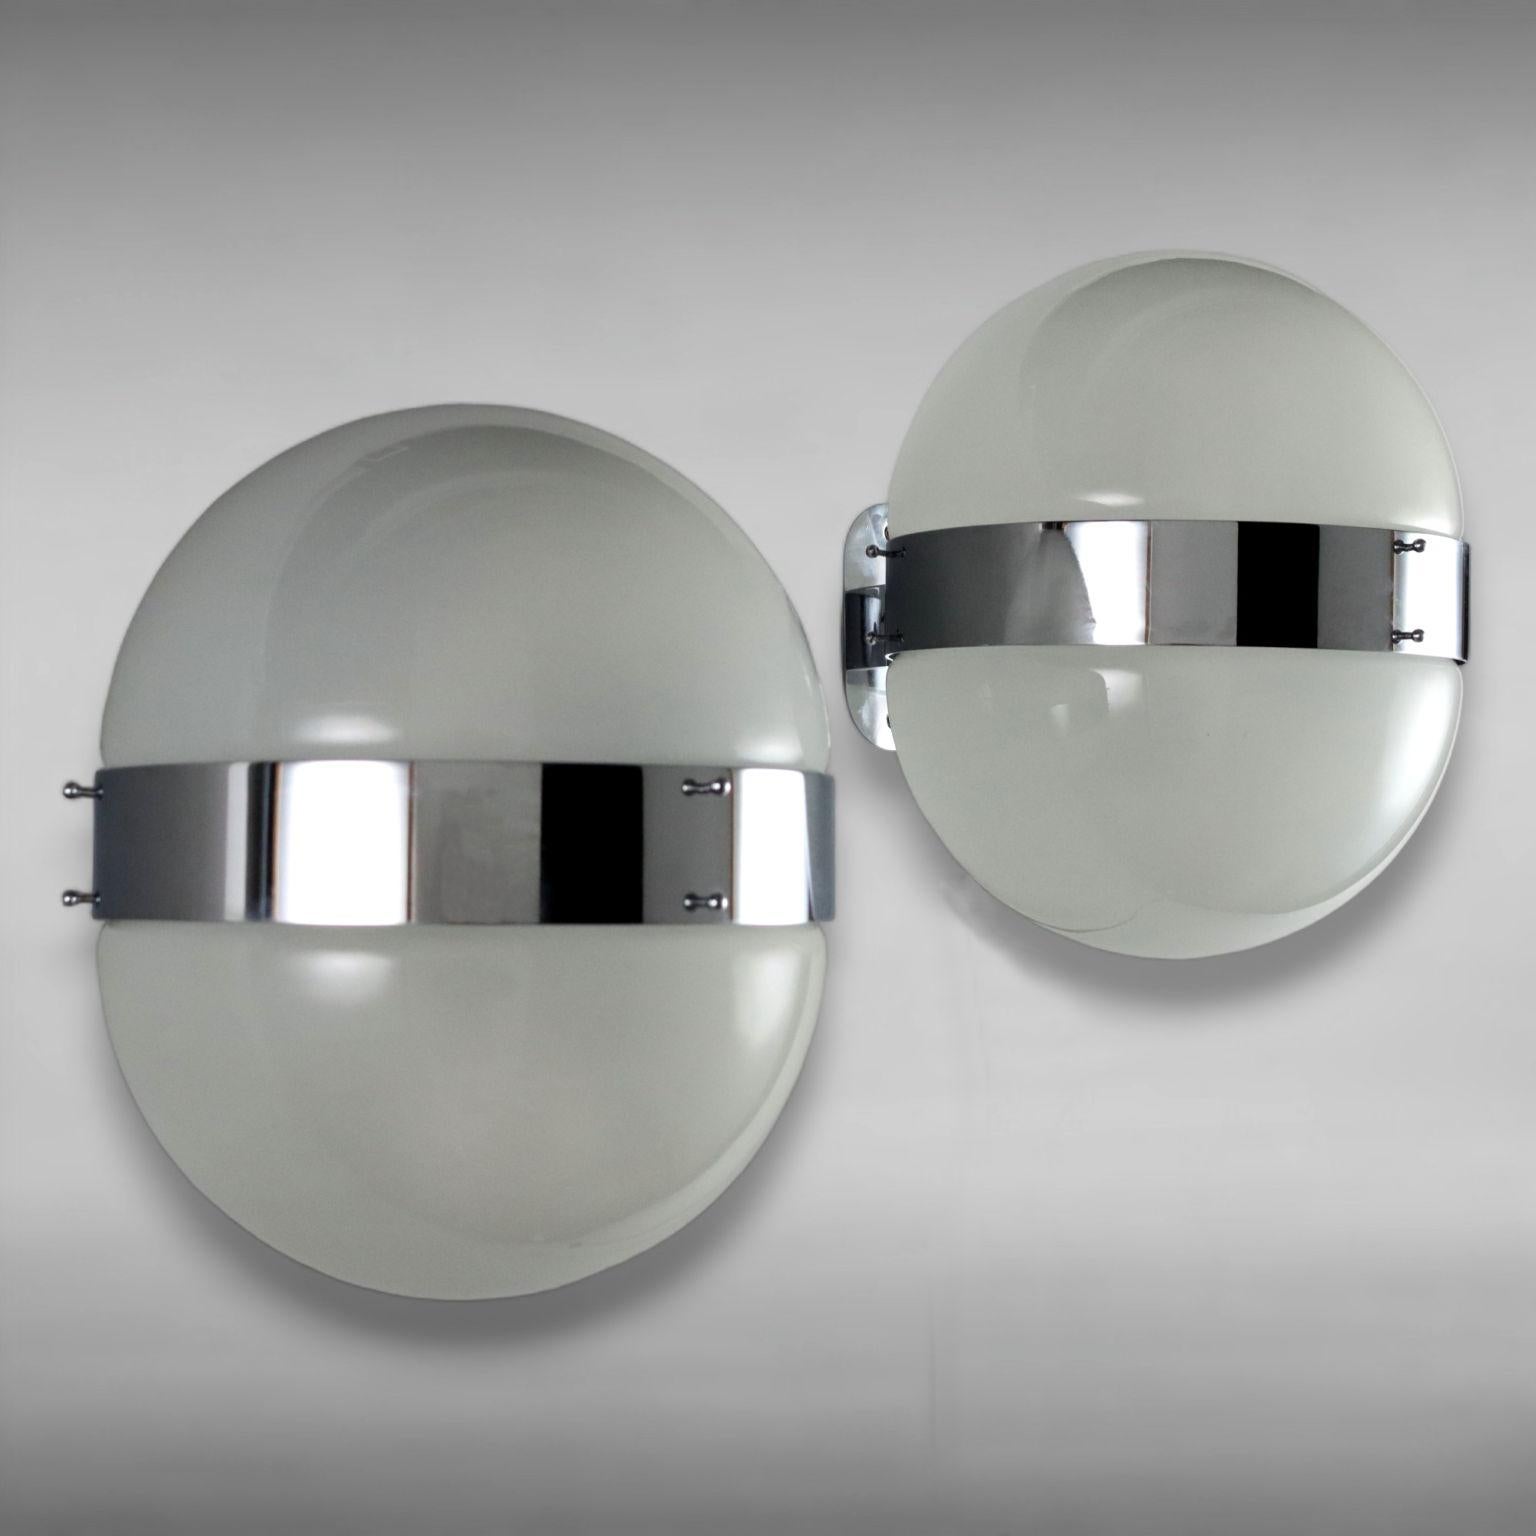 Pair of wall lamps made of chrome-plated metal with glass diffusers.